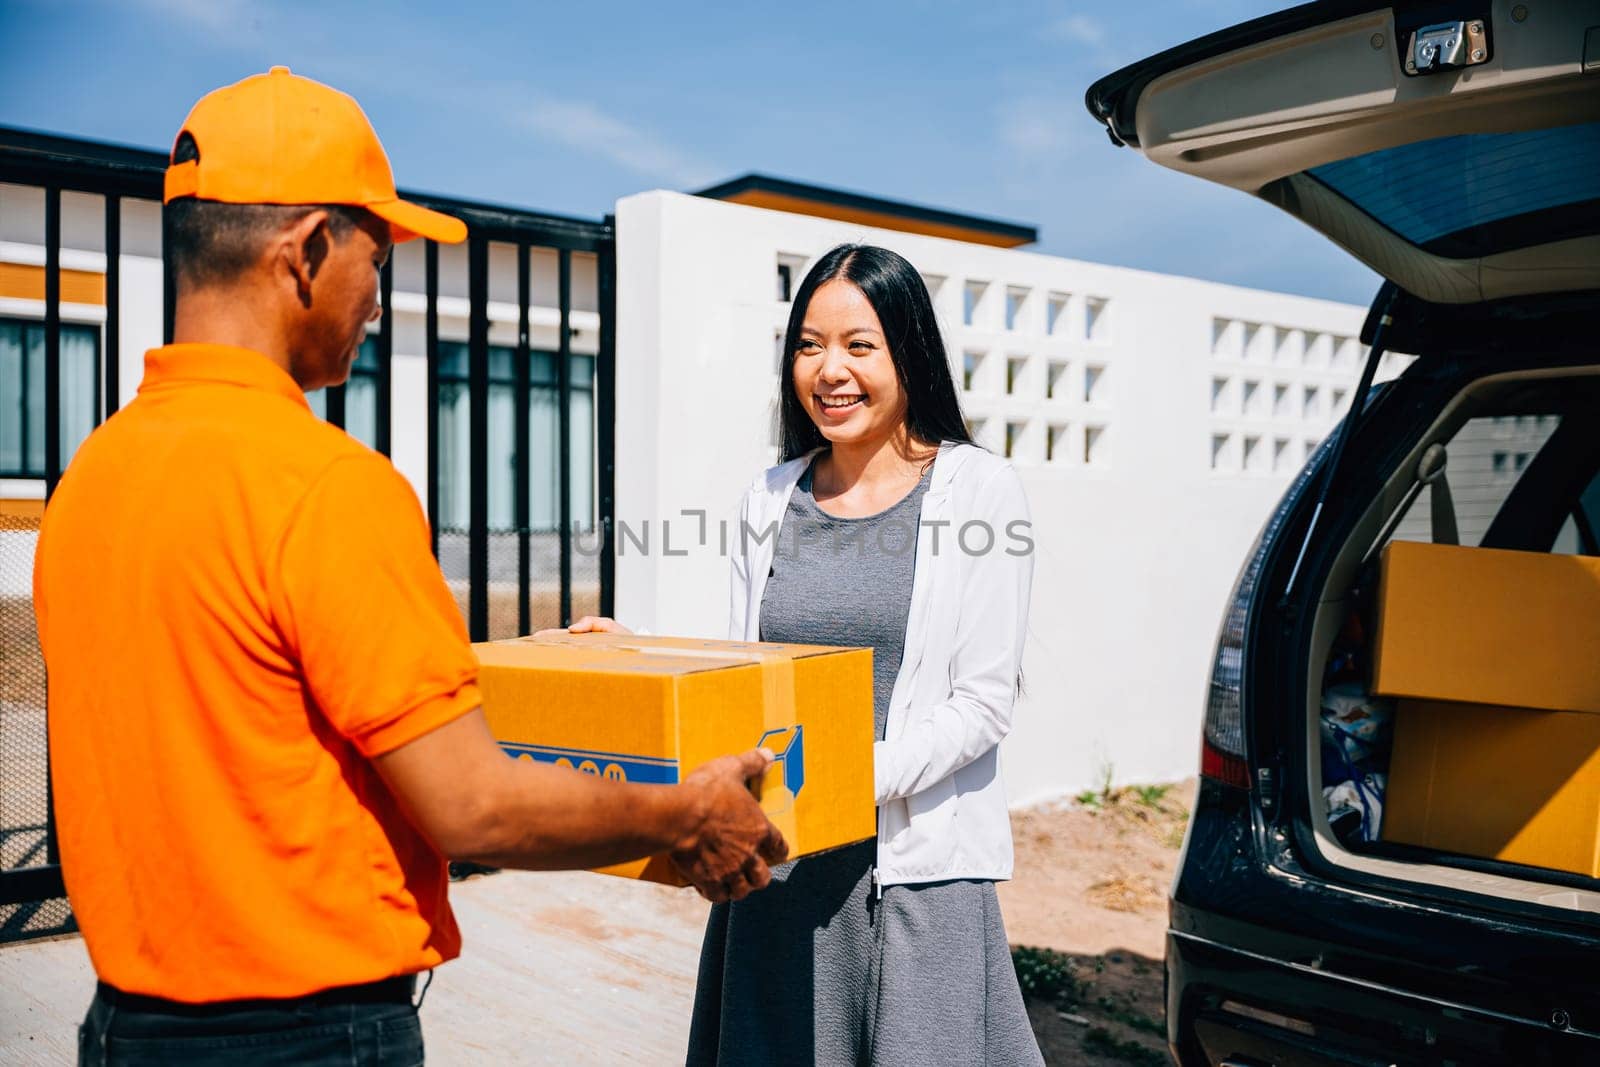 Efficient home delivery logistics depicted as a courier delivers a cardboard parcel to a smiling woman by Sorapop